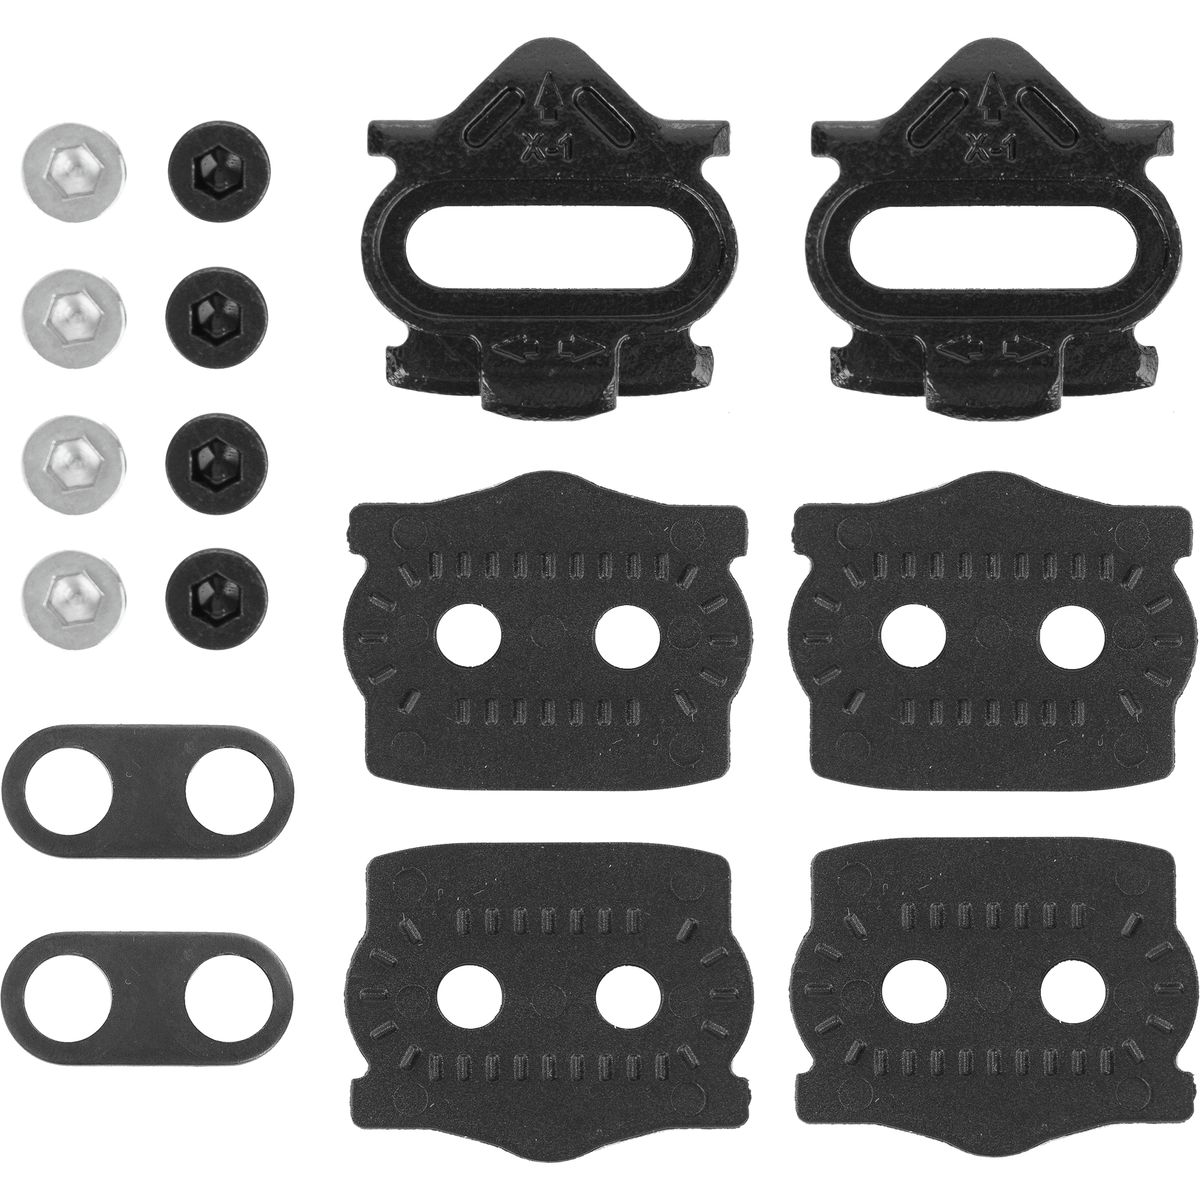 HT Components X1 Cleats